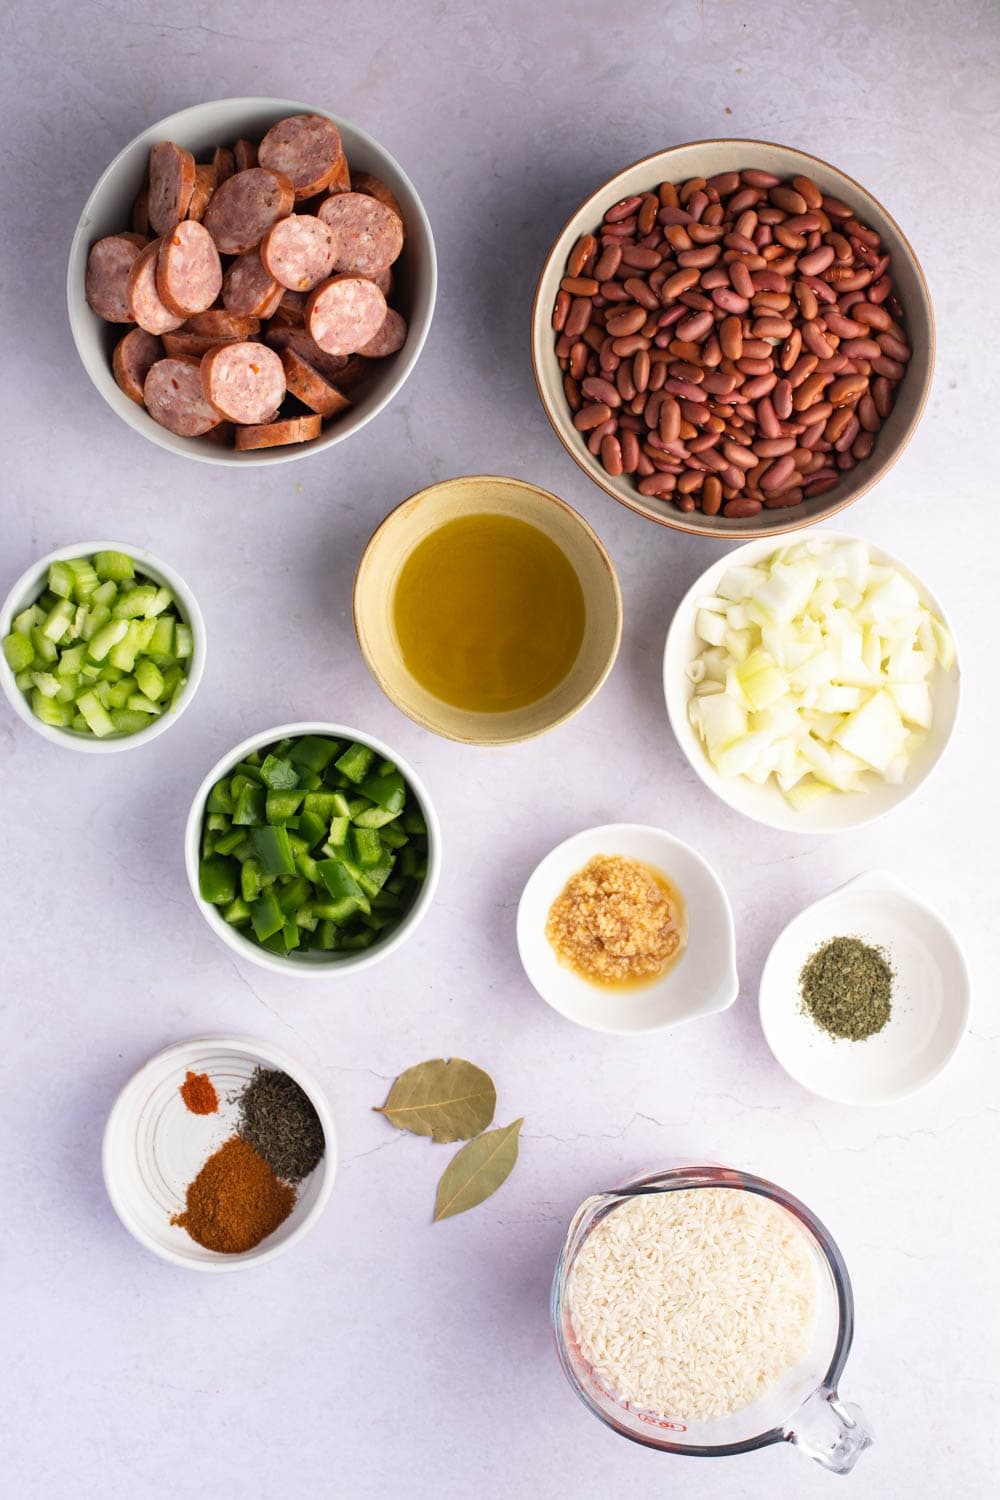 Red Beans and Rice Ingredients - Red Kidney Beans, Olive Oil, Onions, Celery, Garlic, Parsley, Thyme and Sausage